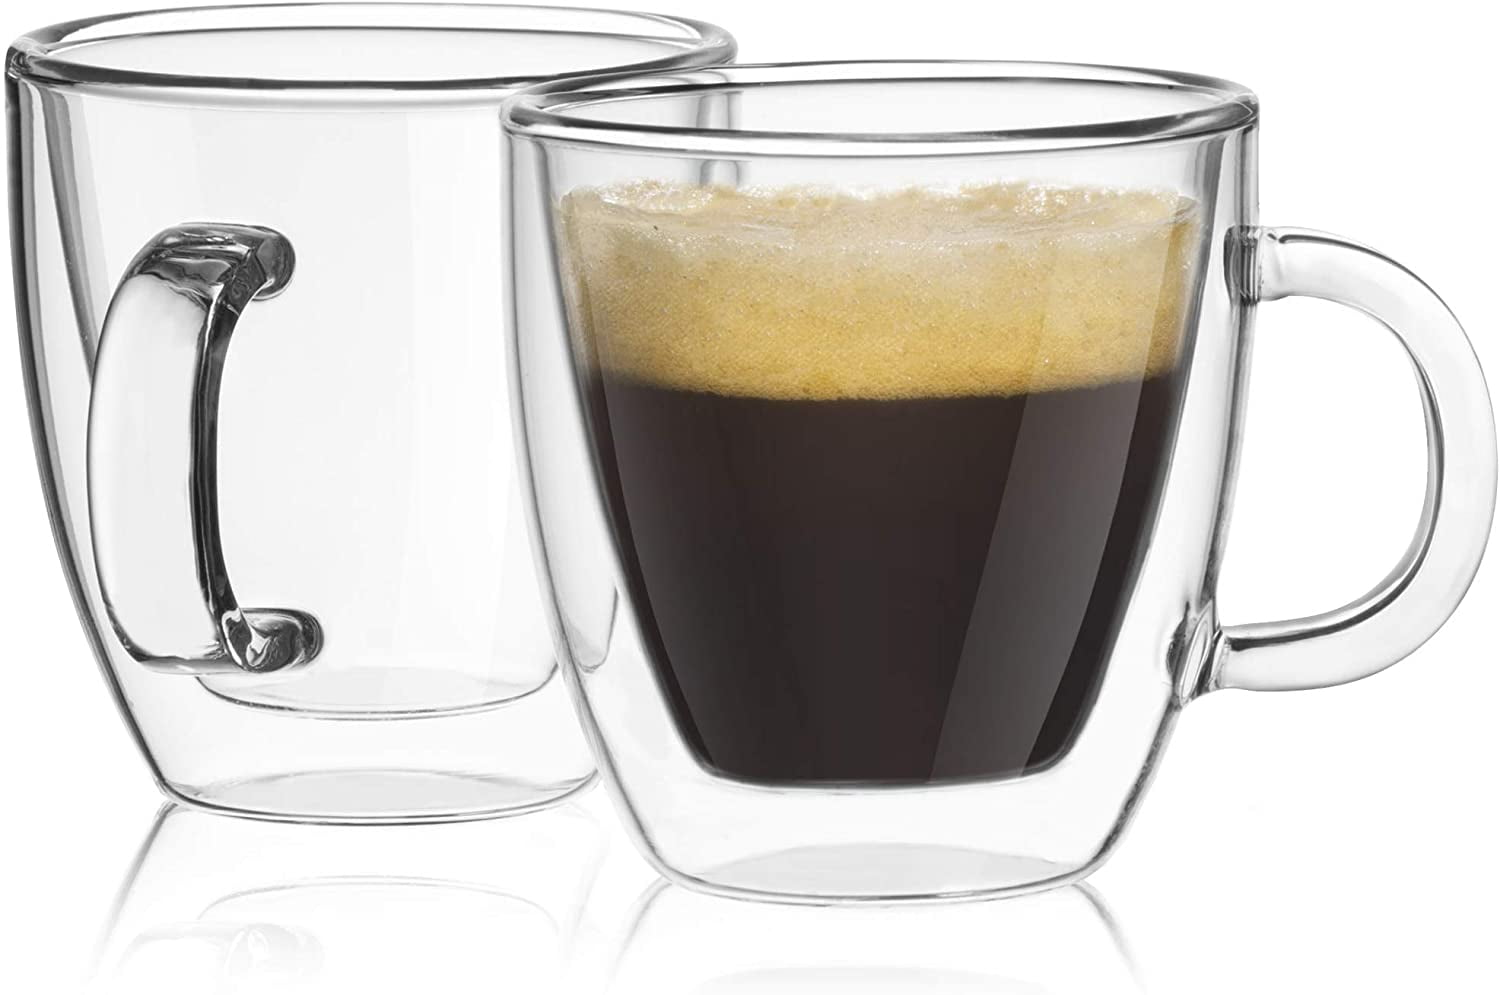 Pack of 2 Free Glass Spoons Double Walled Insulated Espresso Cups Set of 2-2.7 oz Espresso Coffee Mugs Demitasse Coffee Cups for Espresso Machine and Coffee Maker 